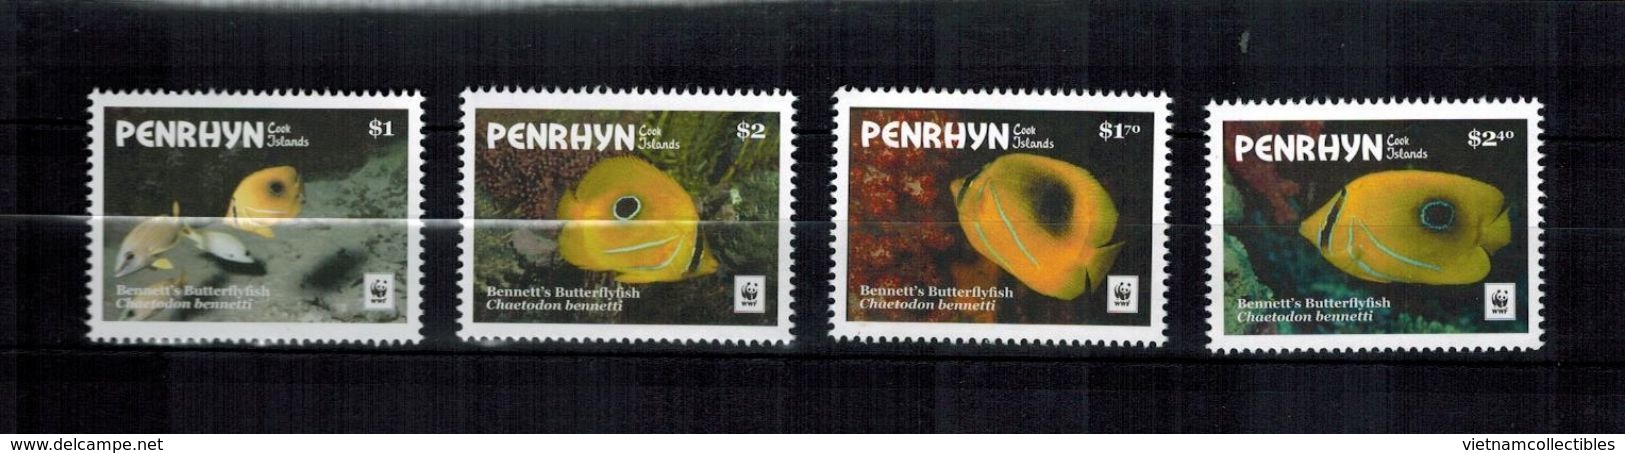 W.W.F. WWF WWF Penrhyn Islands MNH Perf Stamps 2017 : Butterfly Fish - Unused Stamps